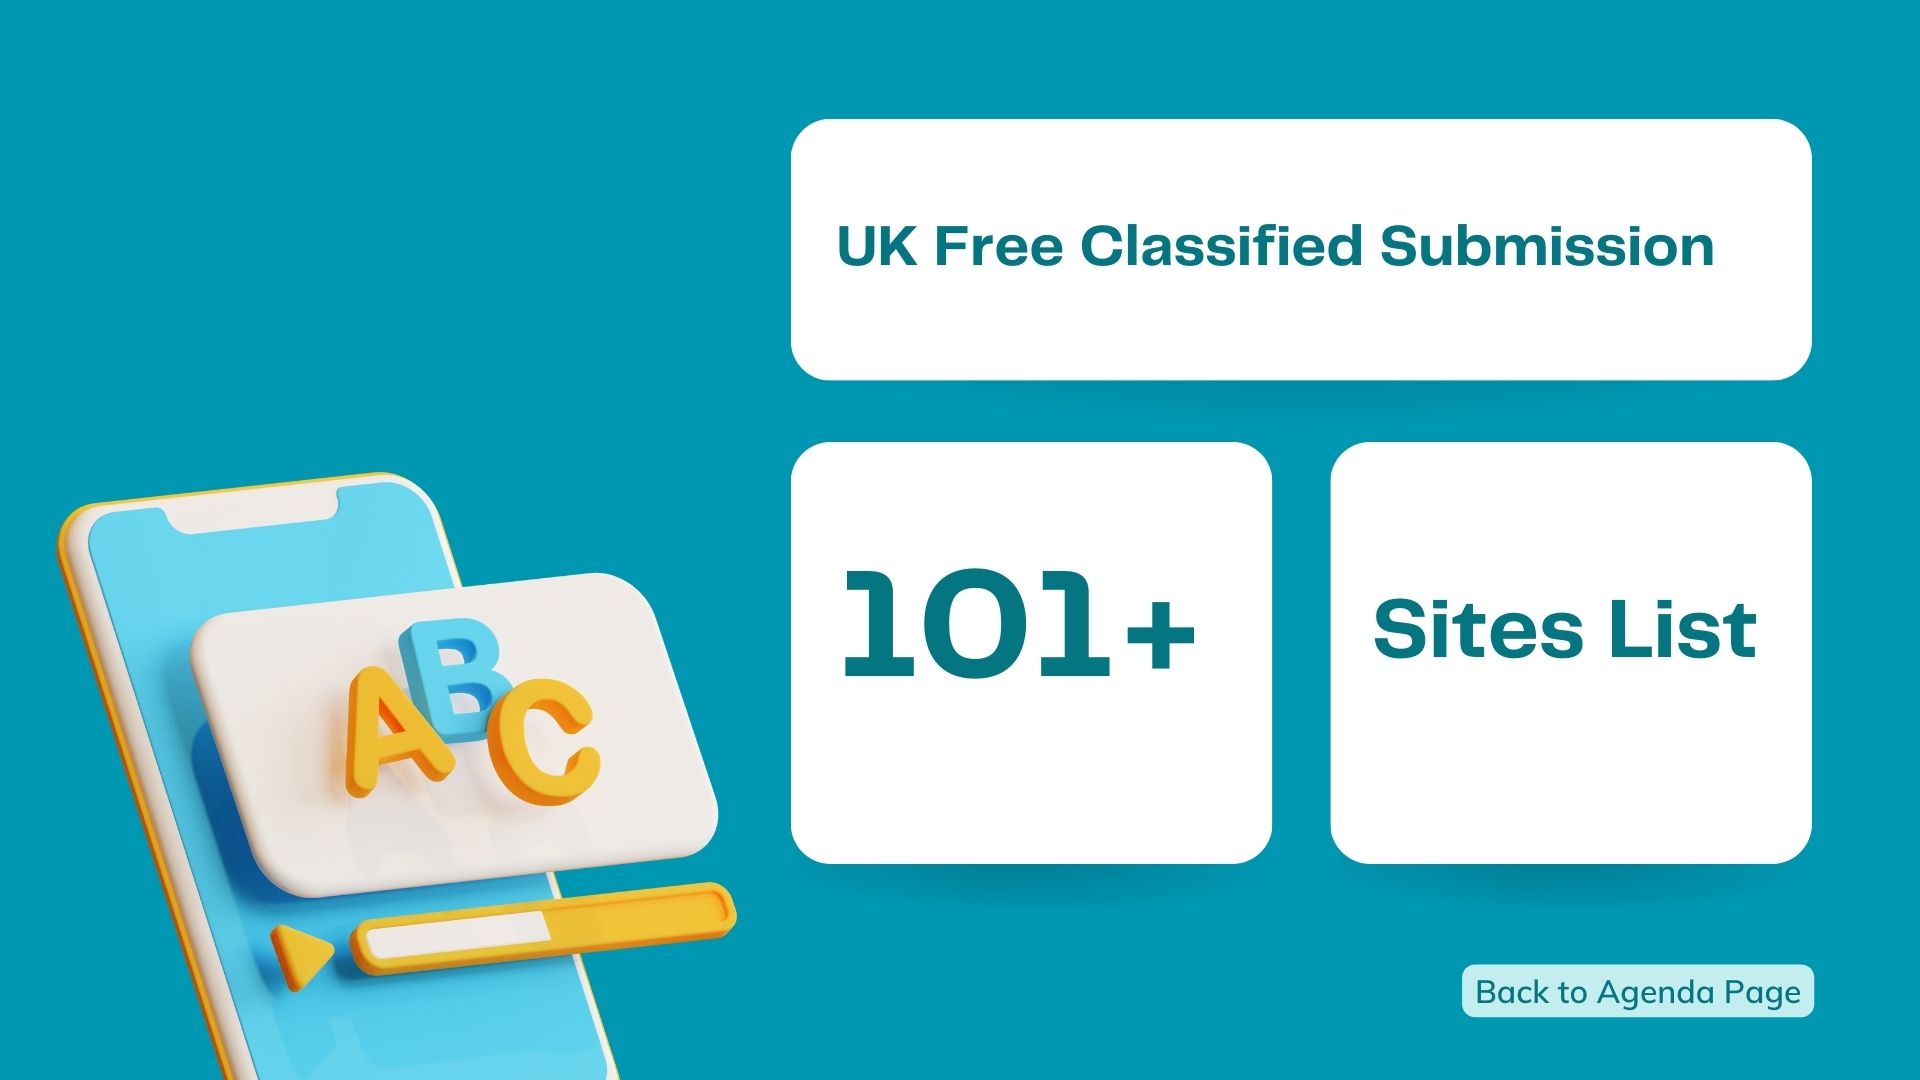 101+ UK Free Classified Submission Sites List